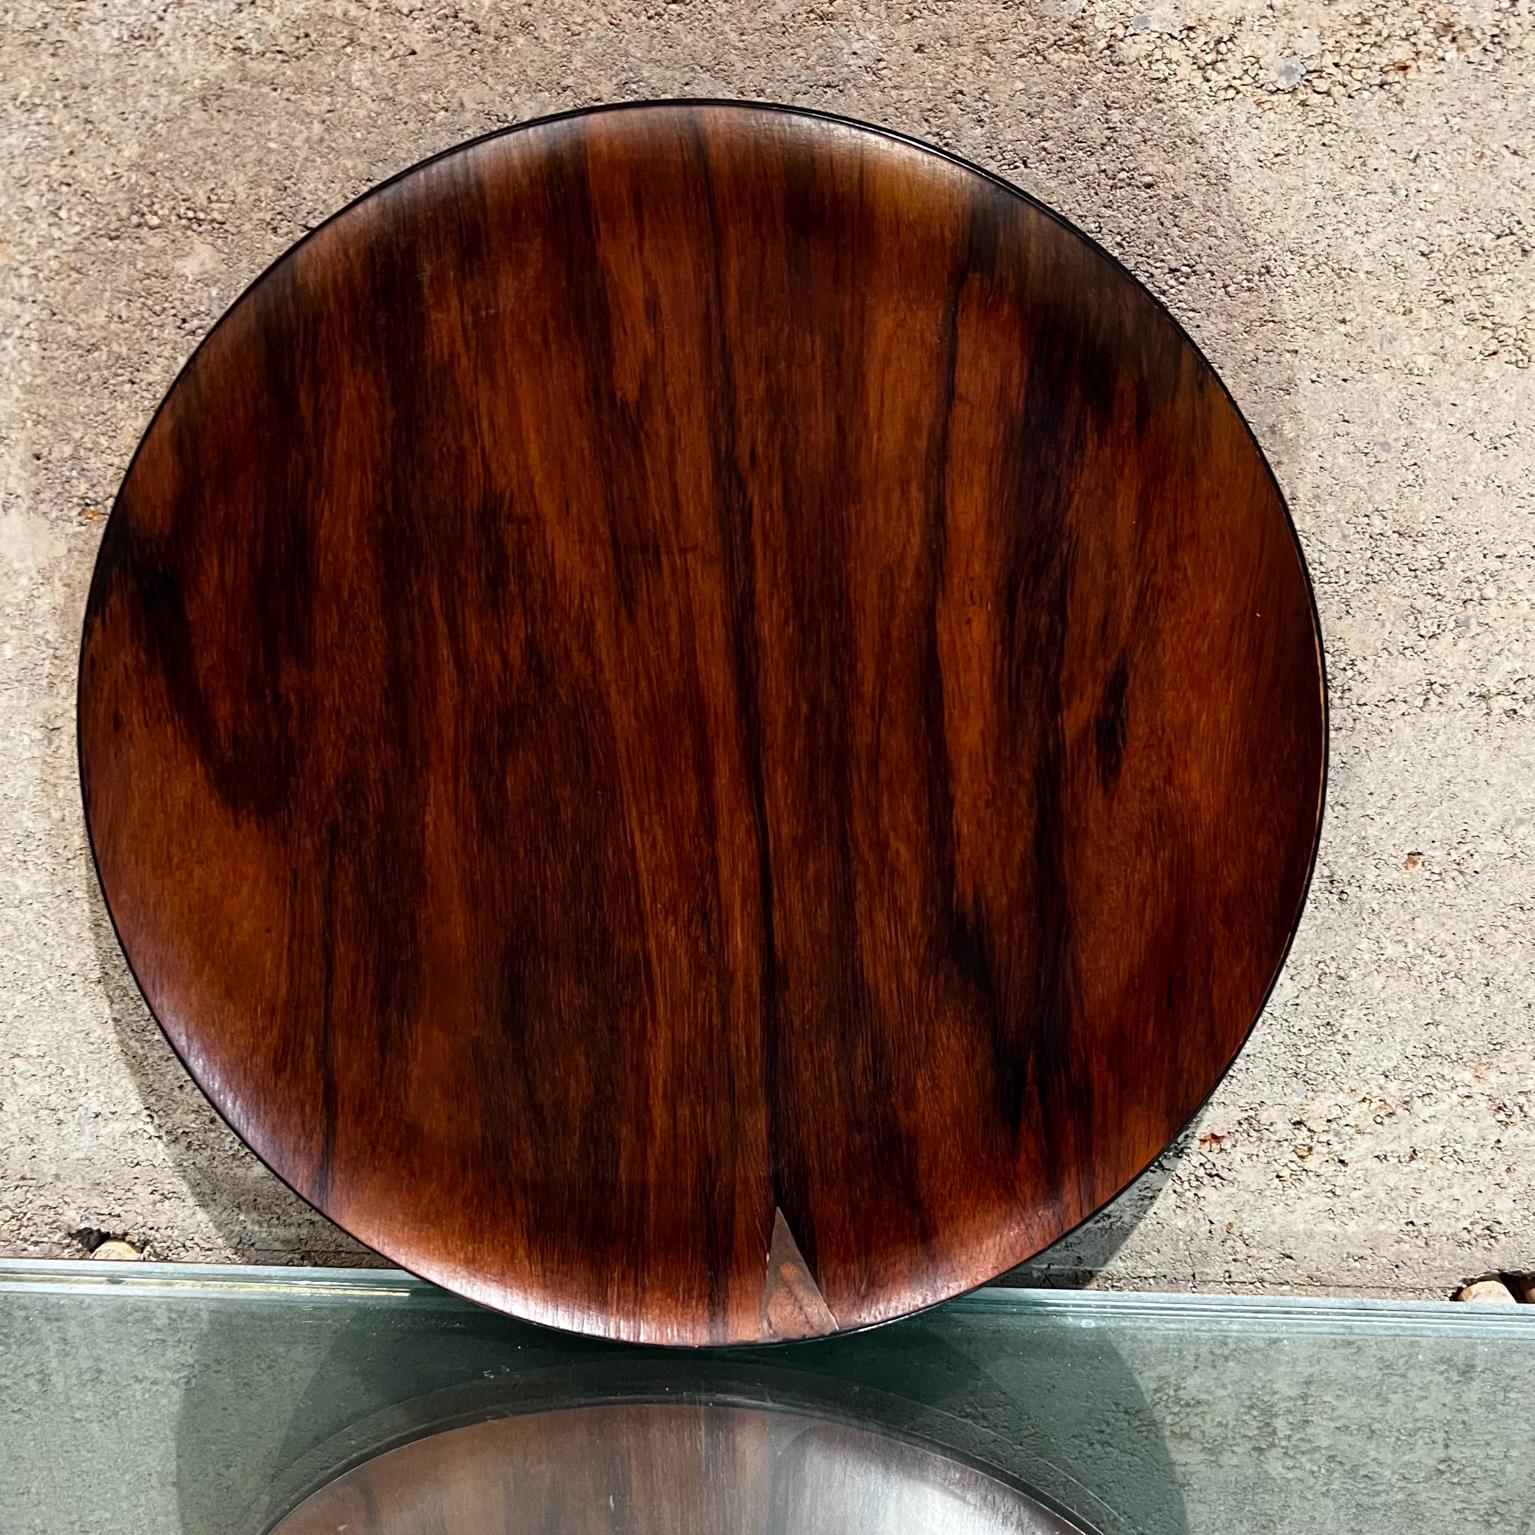 1970s round rosewood service tray Mid-Century Modern Japan.
Vintage service plate in laminated wood rosewood veneer top. Back panel is painted black.
No label present.
Measures:1 tall x 15 diameter
Attributed to Japan Production circa 1970s.